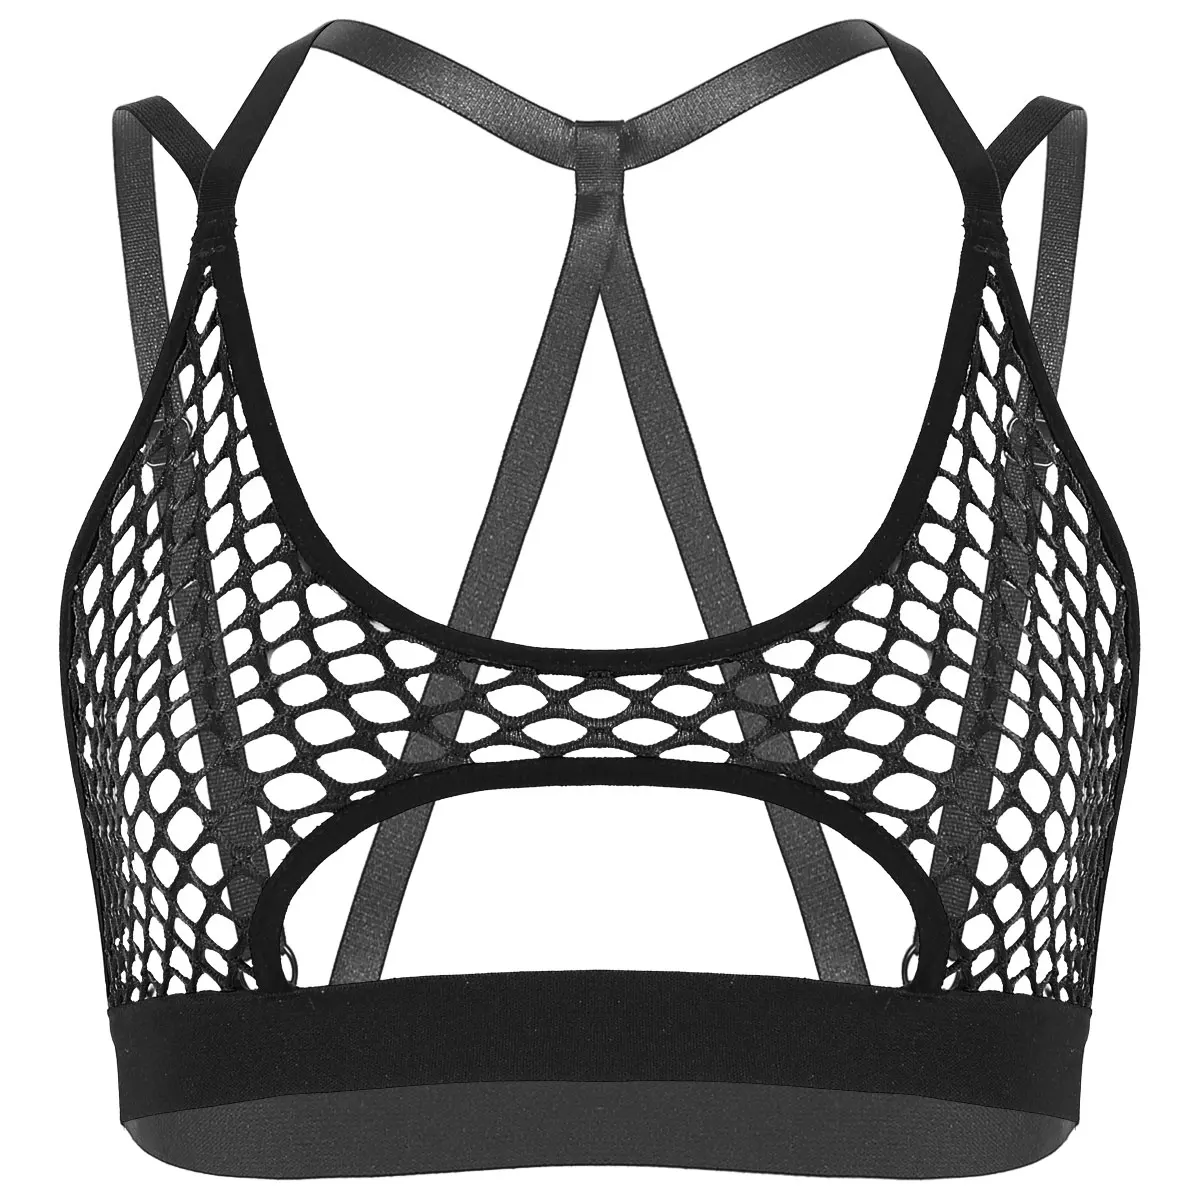 

Sexy Womens See through Hollow Out Perspective Fishnet Top Sheer Top Bodycon T-Shirt Black Tanks Crisscross Back Vest Crop Tops